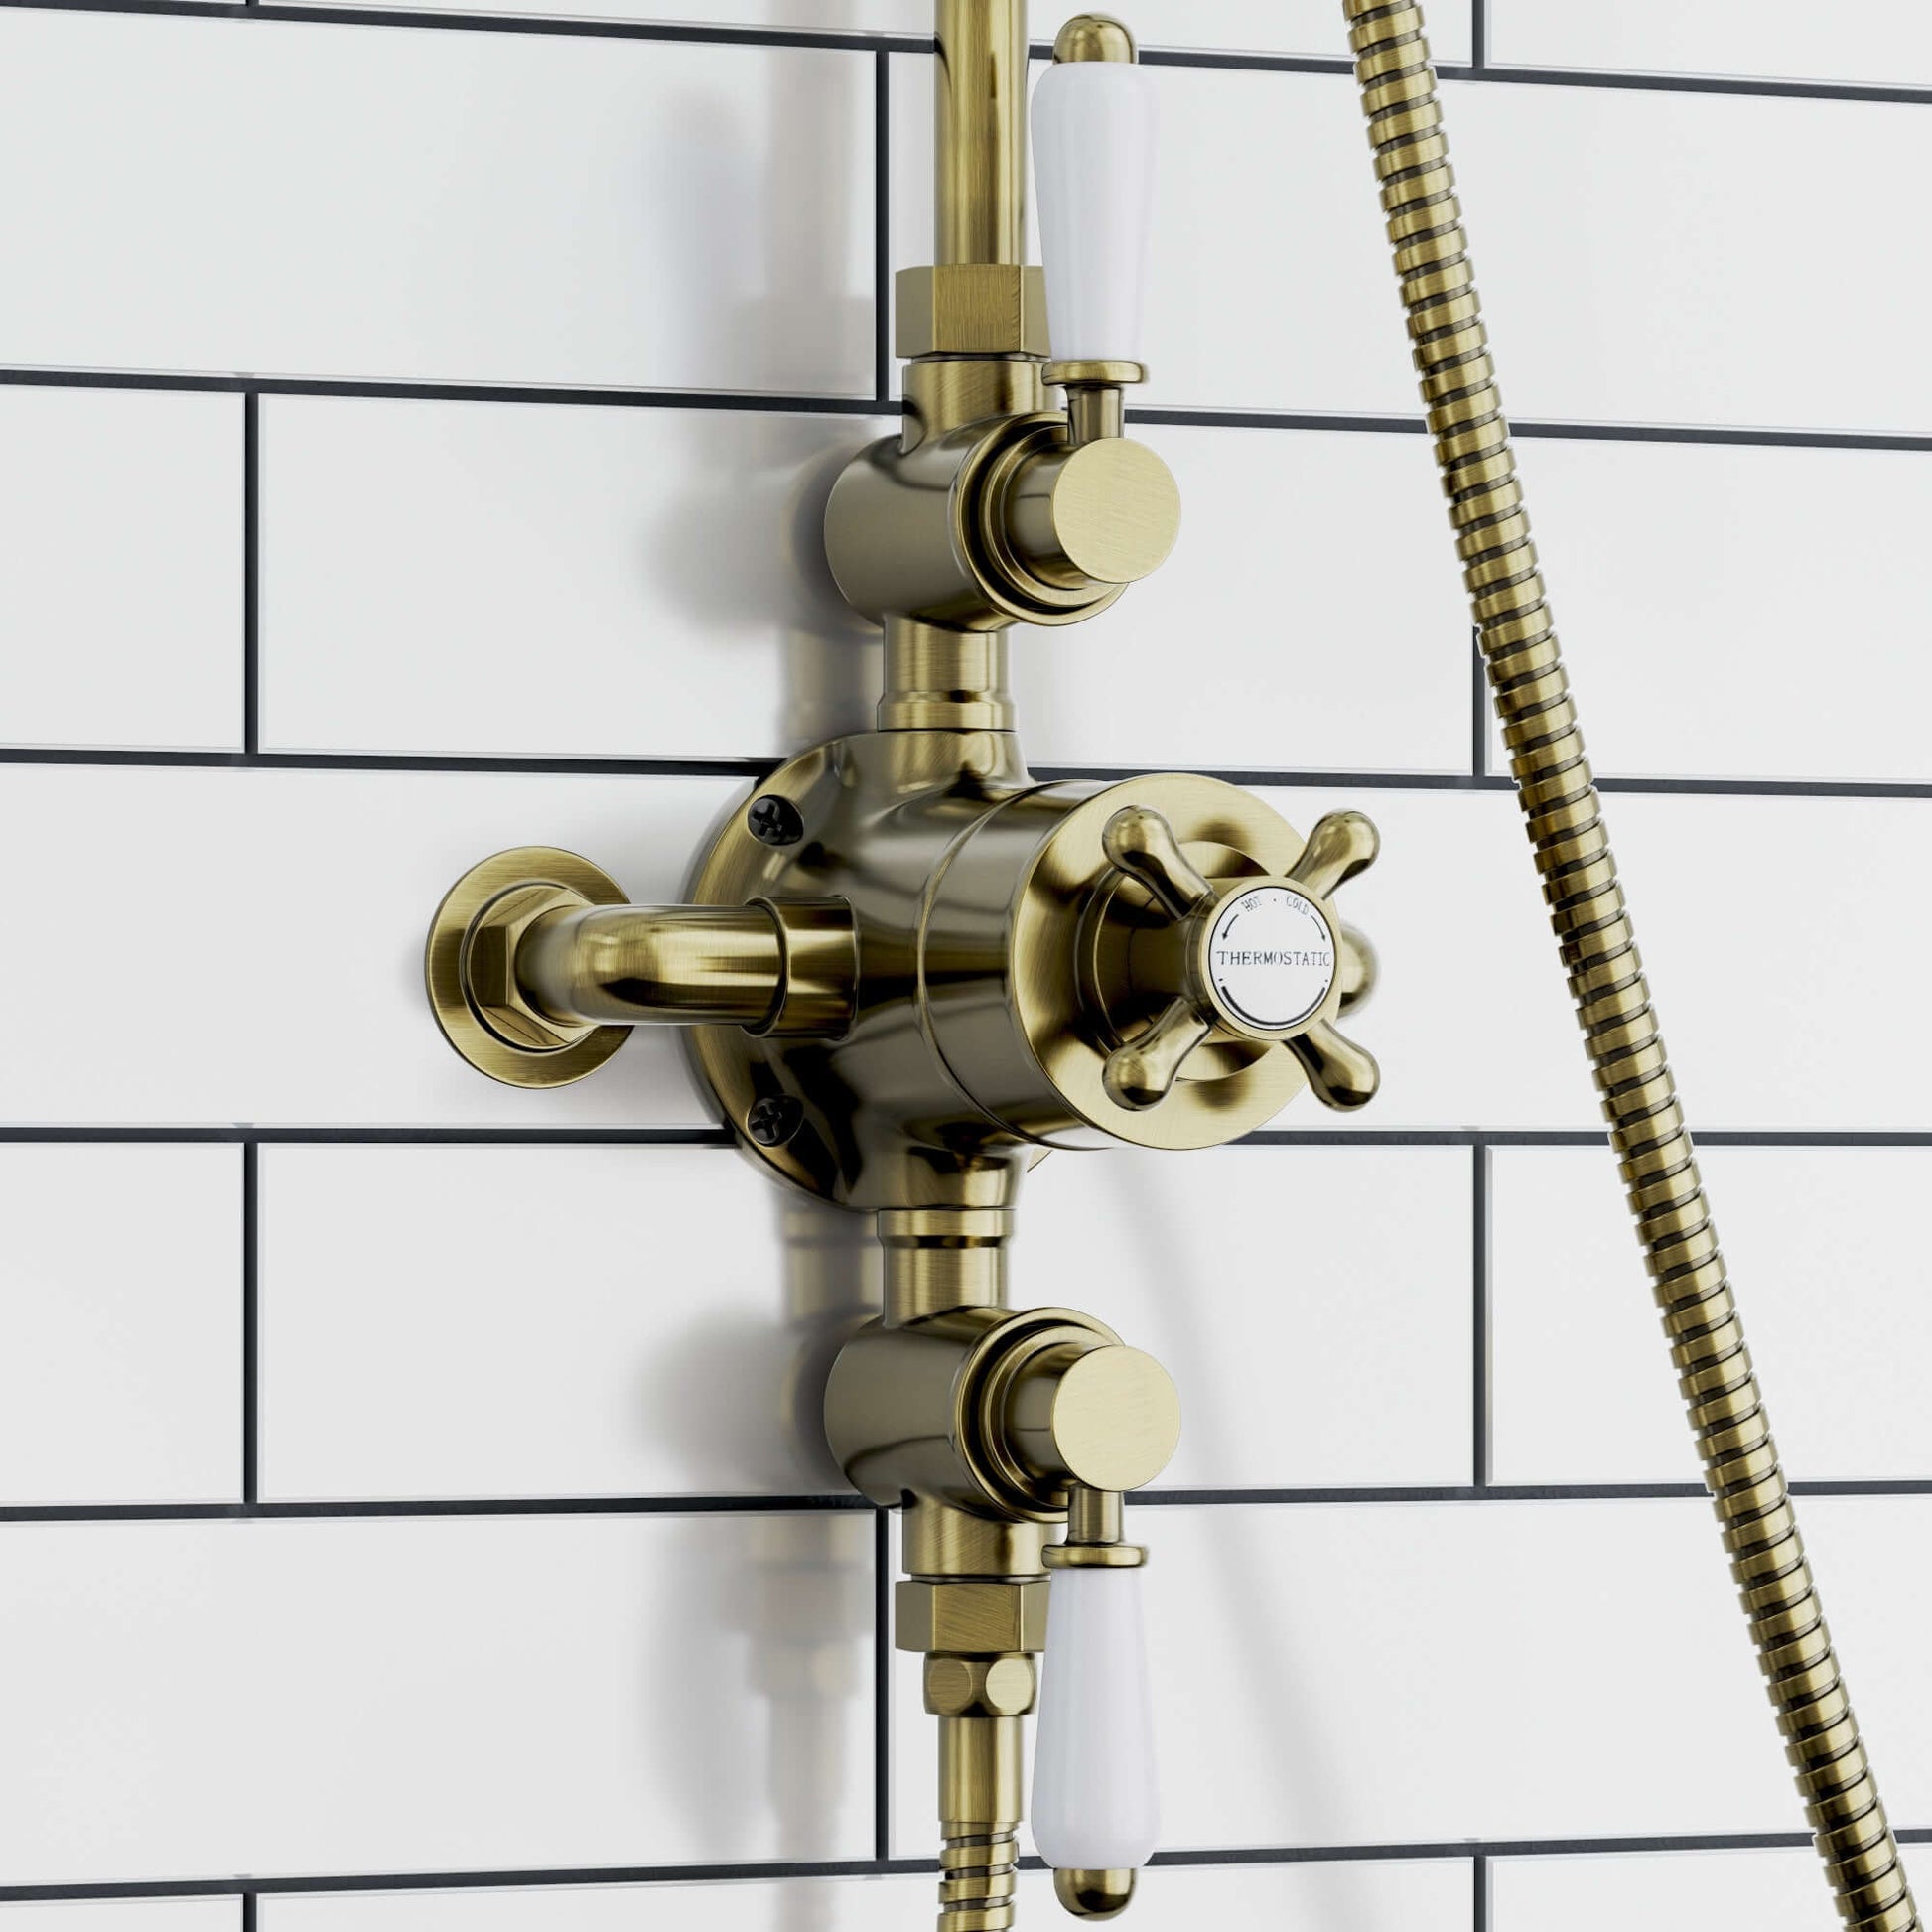 Downton traditional triple thermostatic shower valve two outlet - antique bronze & white - Showers